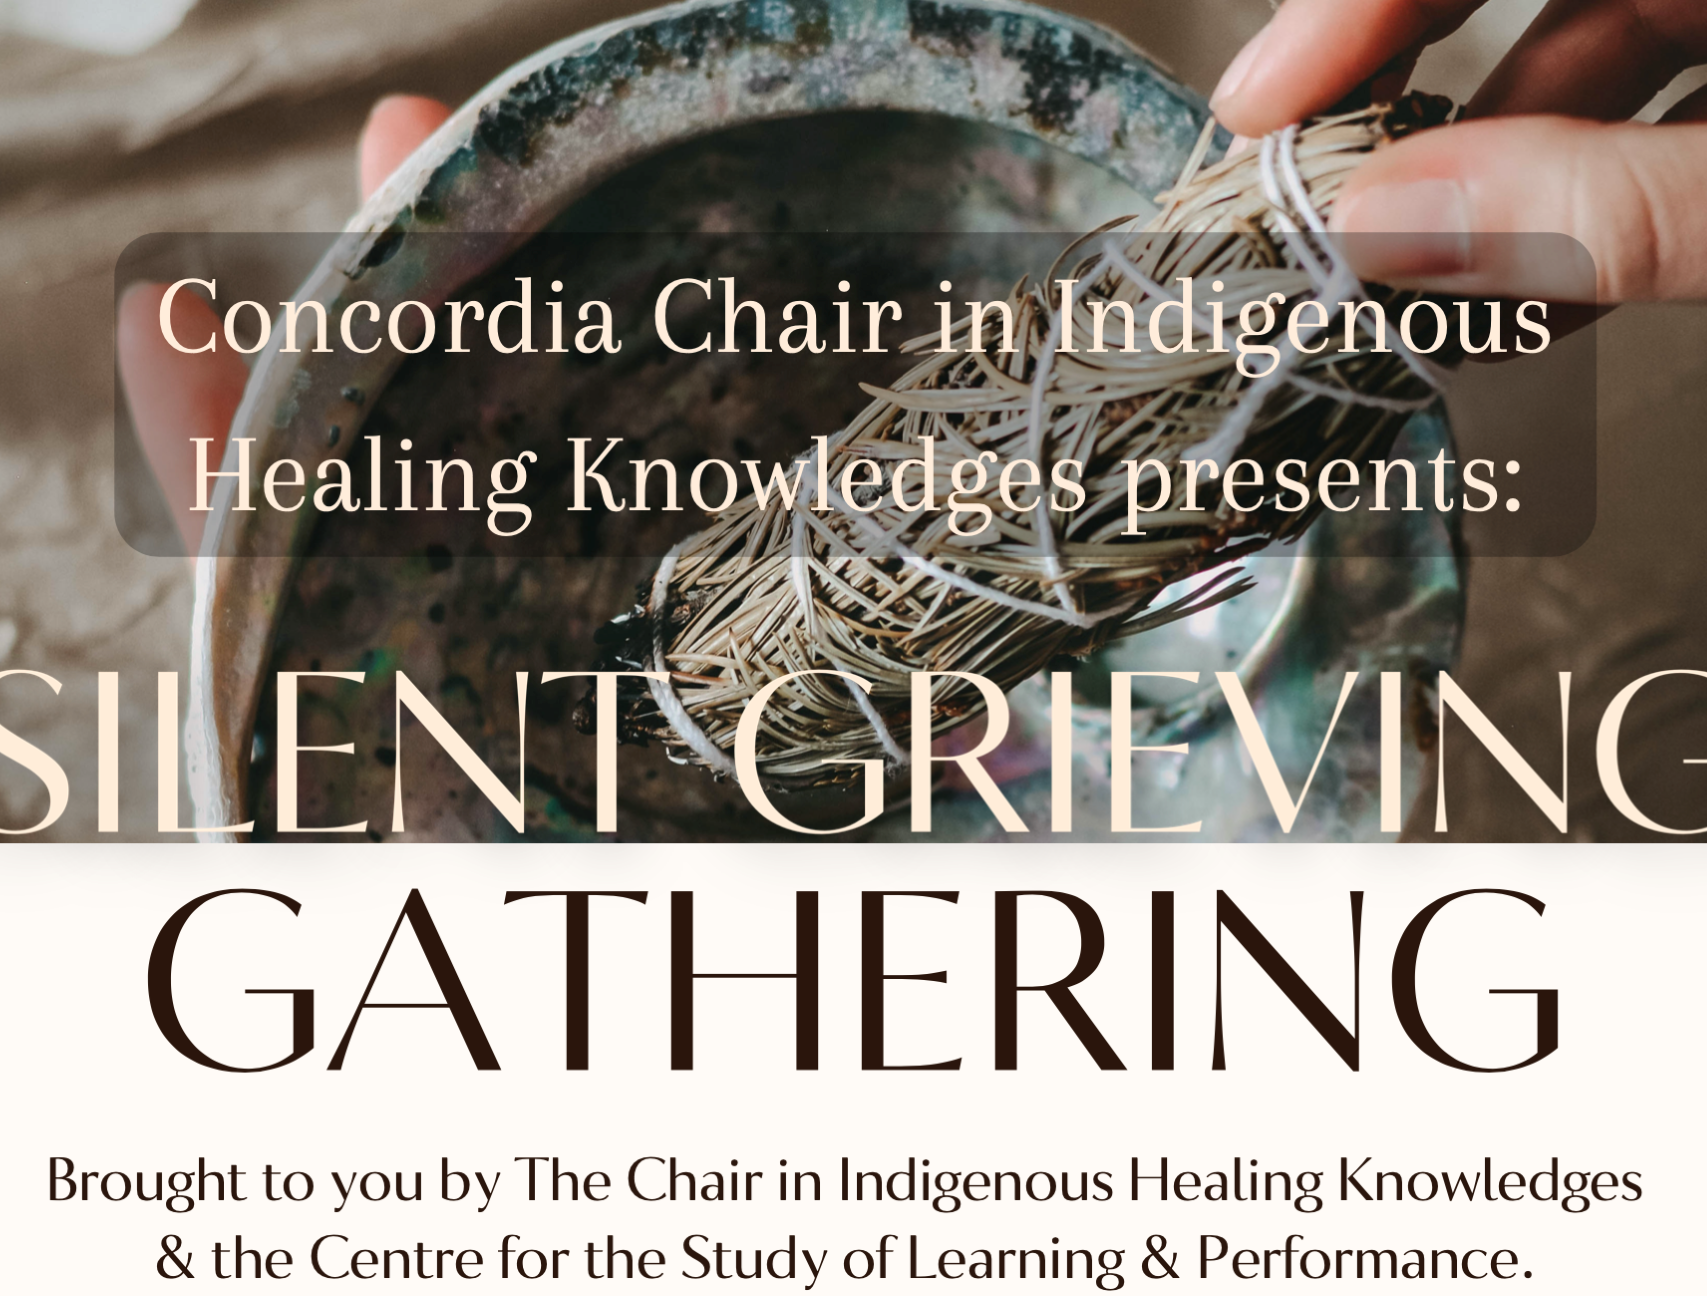 Concordia Chair in Indigenous Healing Knowledges and the CSLP to present a Silent Grieving Gathering